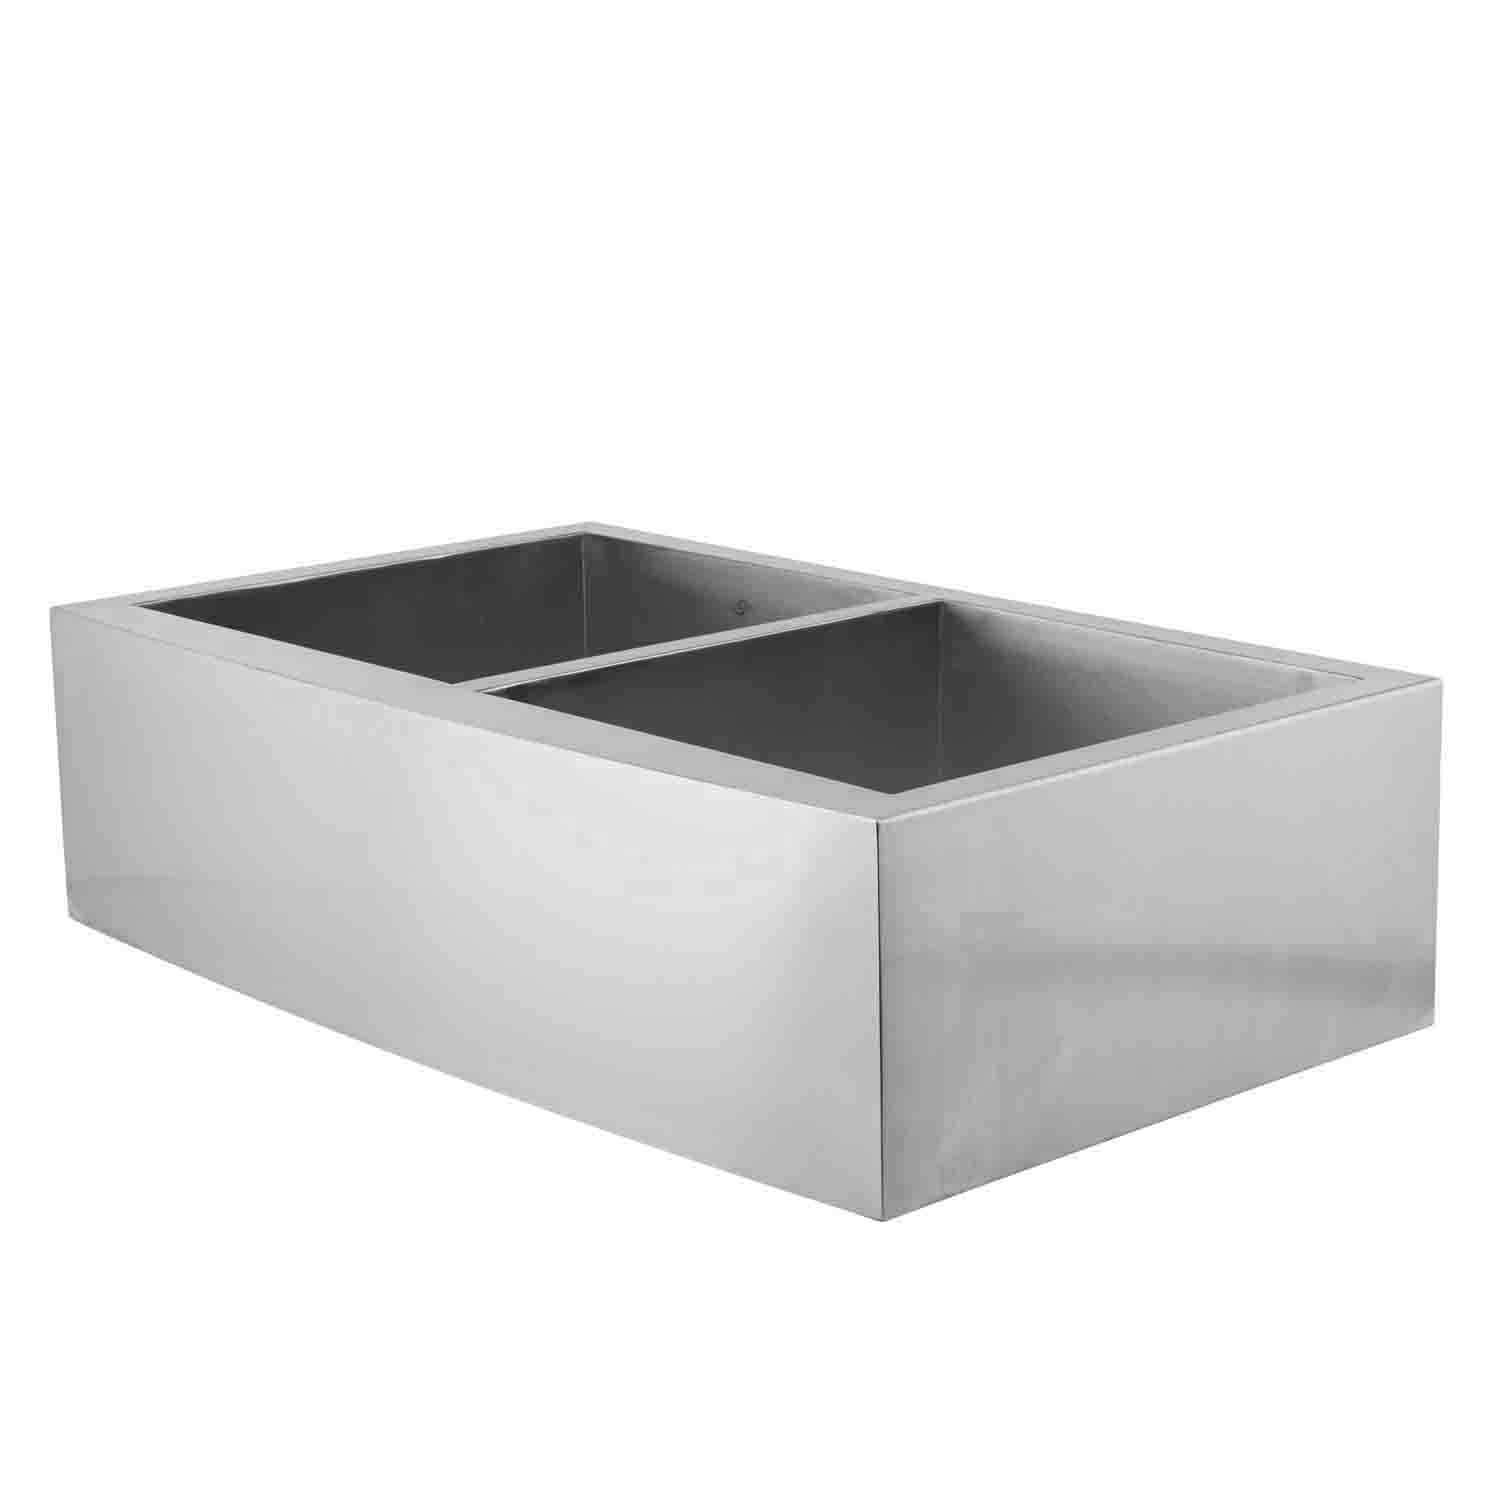 DAX Farmhouse 50/50 Double Bowl Kitchen Sink, 16 Gauge Stainless Steel, Brushed Finish, 33 x 20 x 10 Inches (DAX-SQ-3320F)